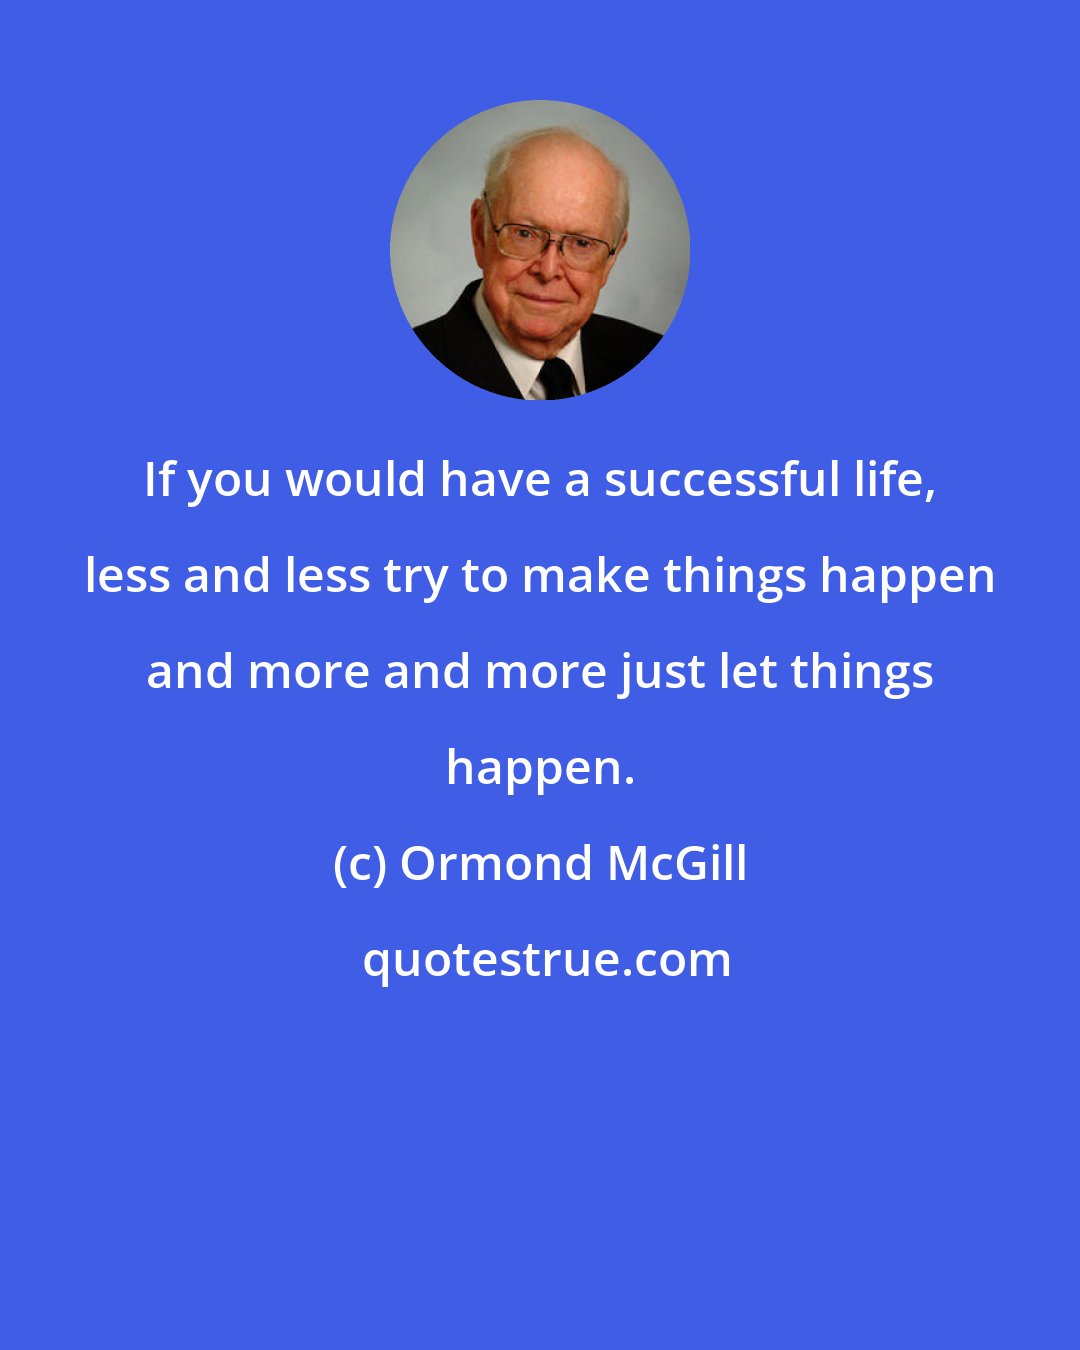 Ormond McGill: If you would have a successful life, less and less try to make things happen and more and more just let things happen.